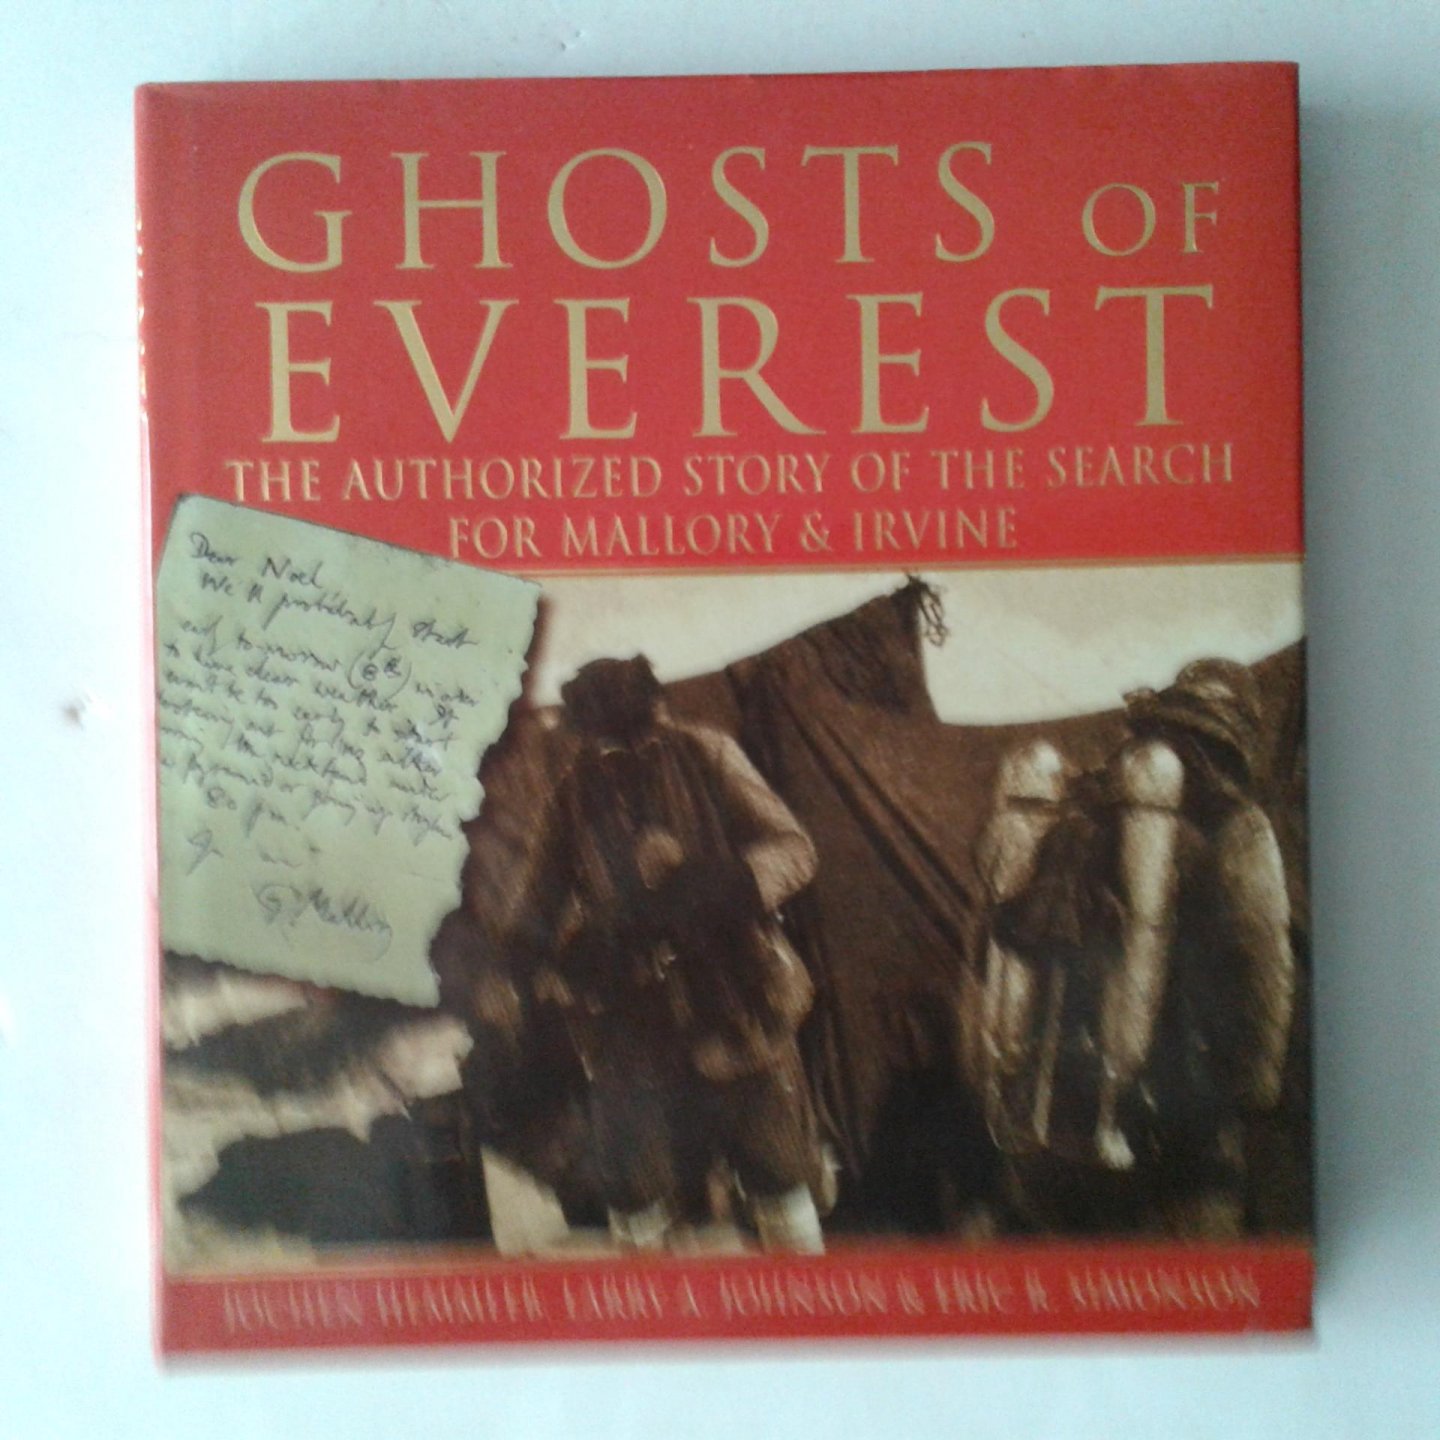 Hemmleb, Jochen ; Johnson, Larry A. ; Simonson, Eric R. - Ghosts of Everest ; The Authorized Story of the Search for Mallory & Irvine